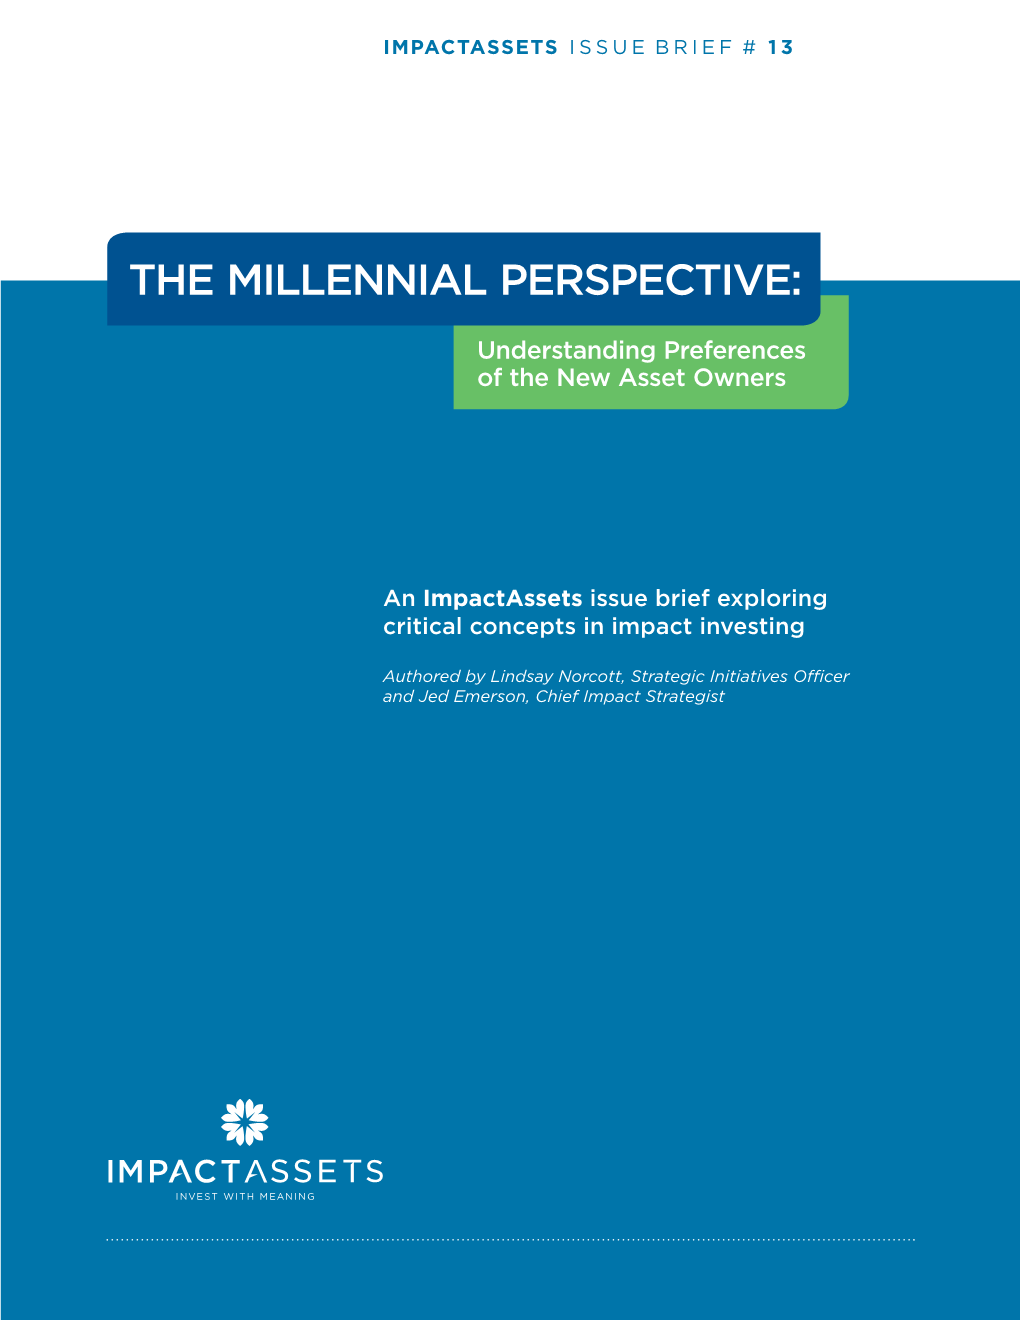 The Millennial Perspective